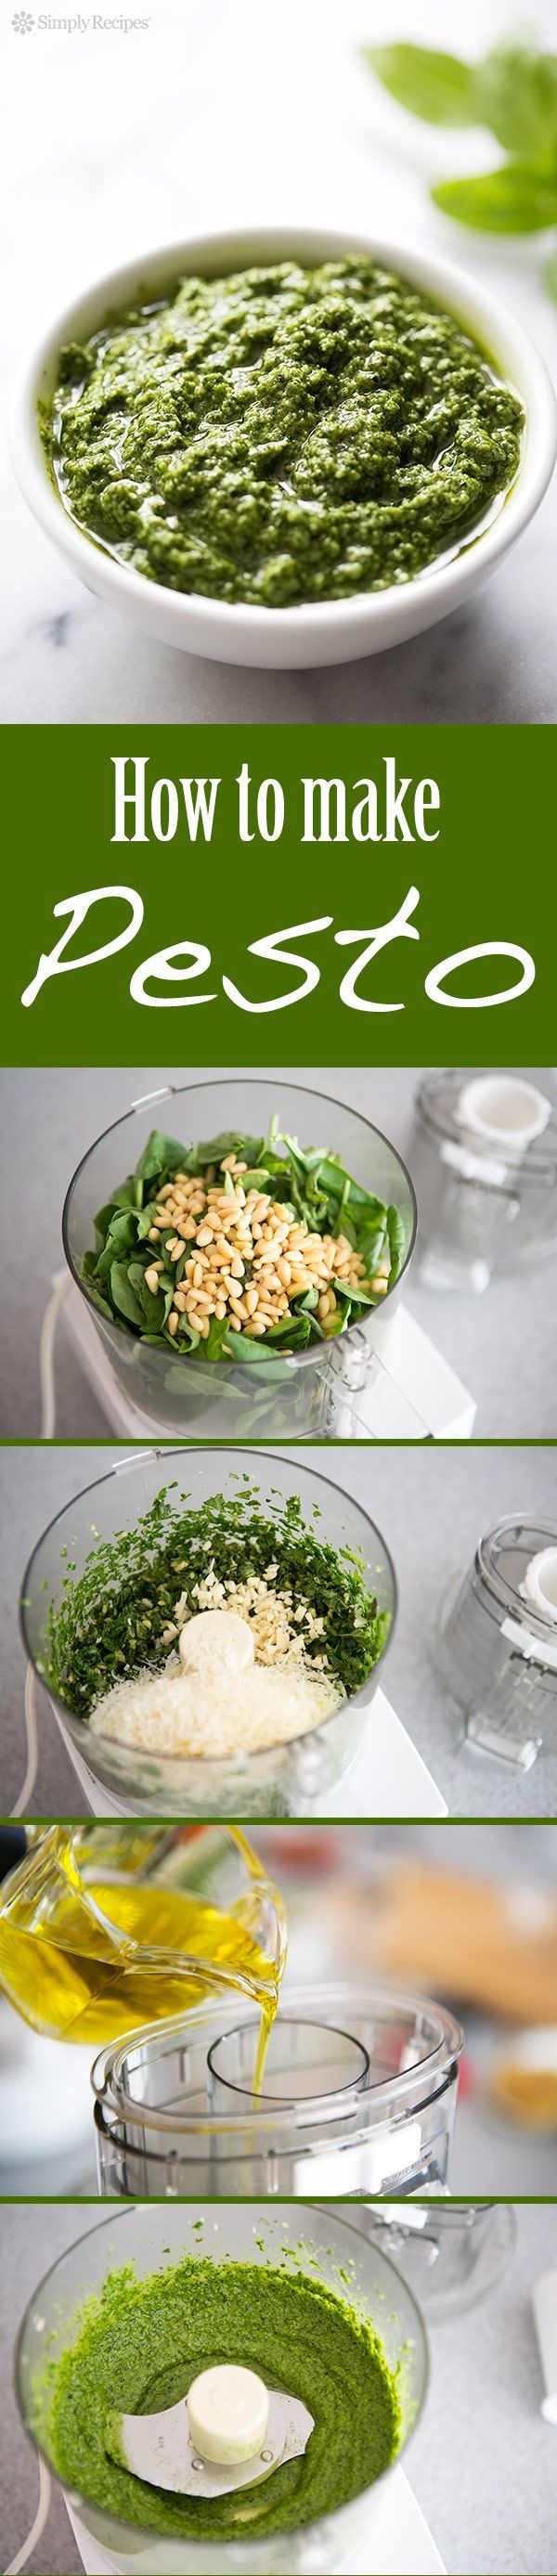 Make your own homemade pesto. It’s easy! Great for adding to pasta, chicken, even toast. With fresh ba